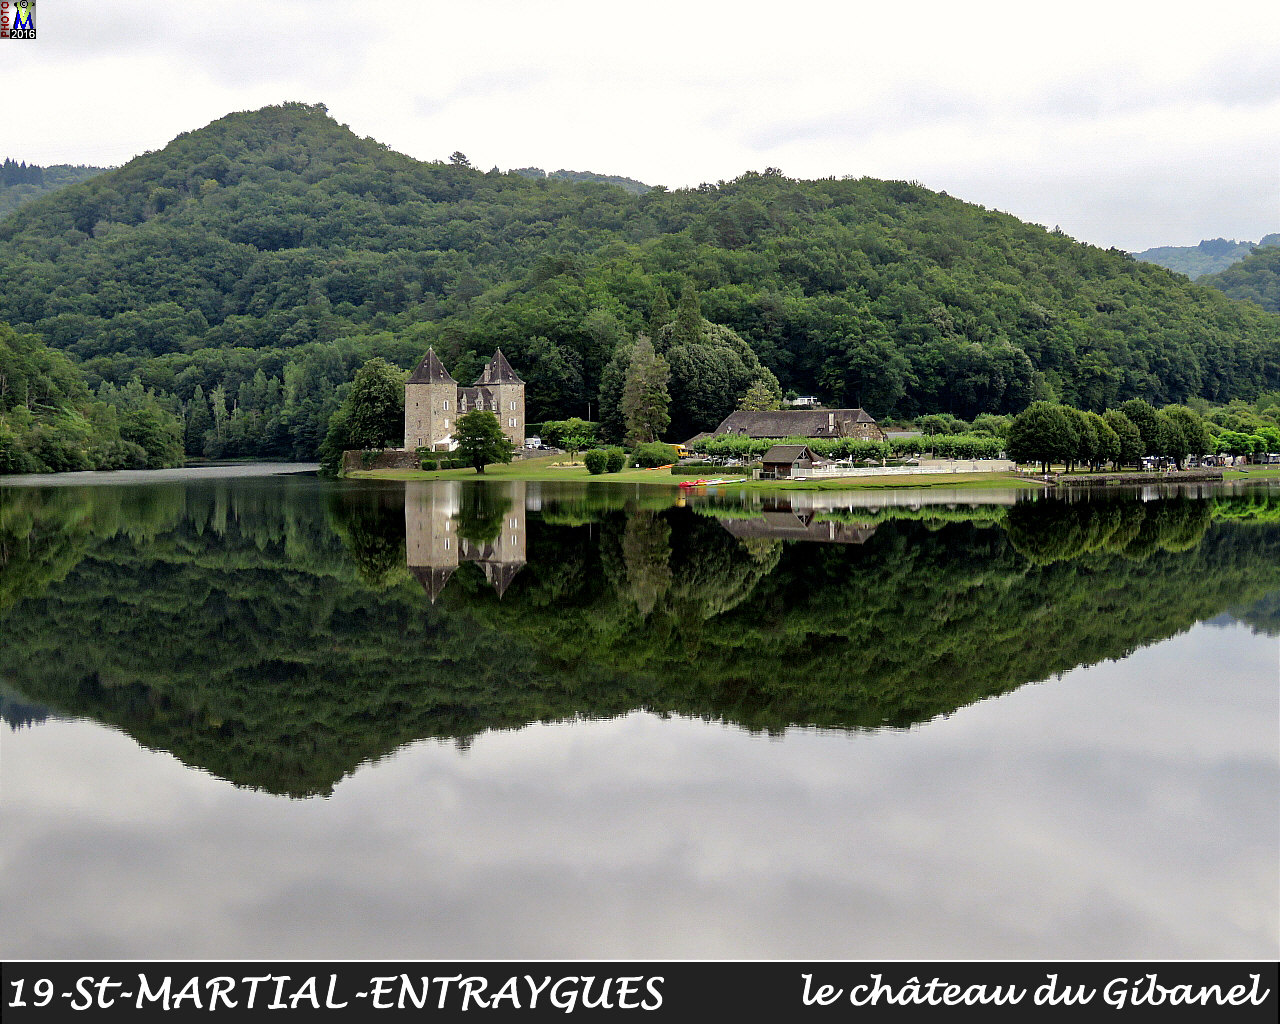 19StMARTIAL-ENTRAYGUES_chateau_100.jpg